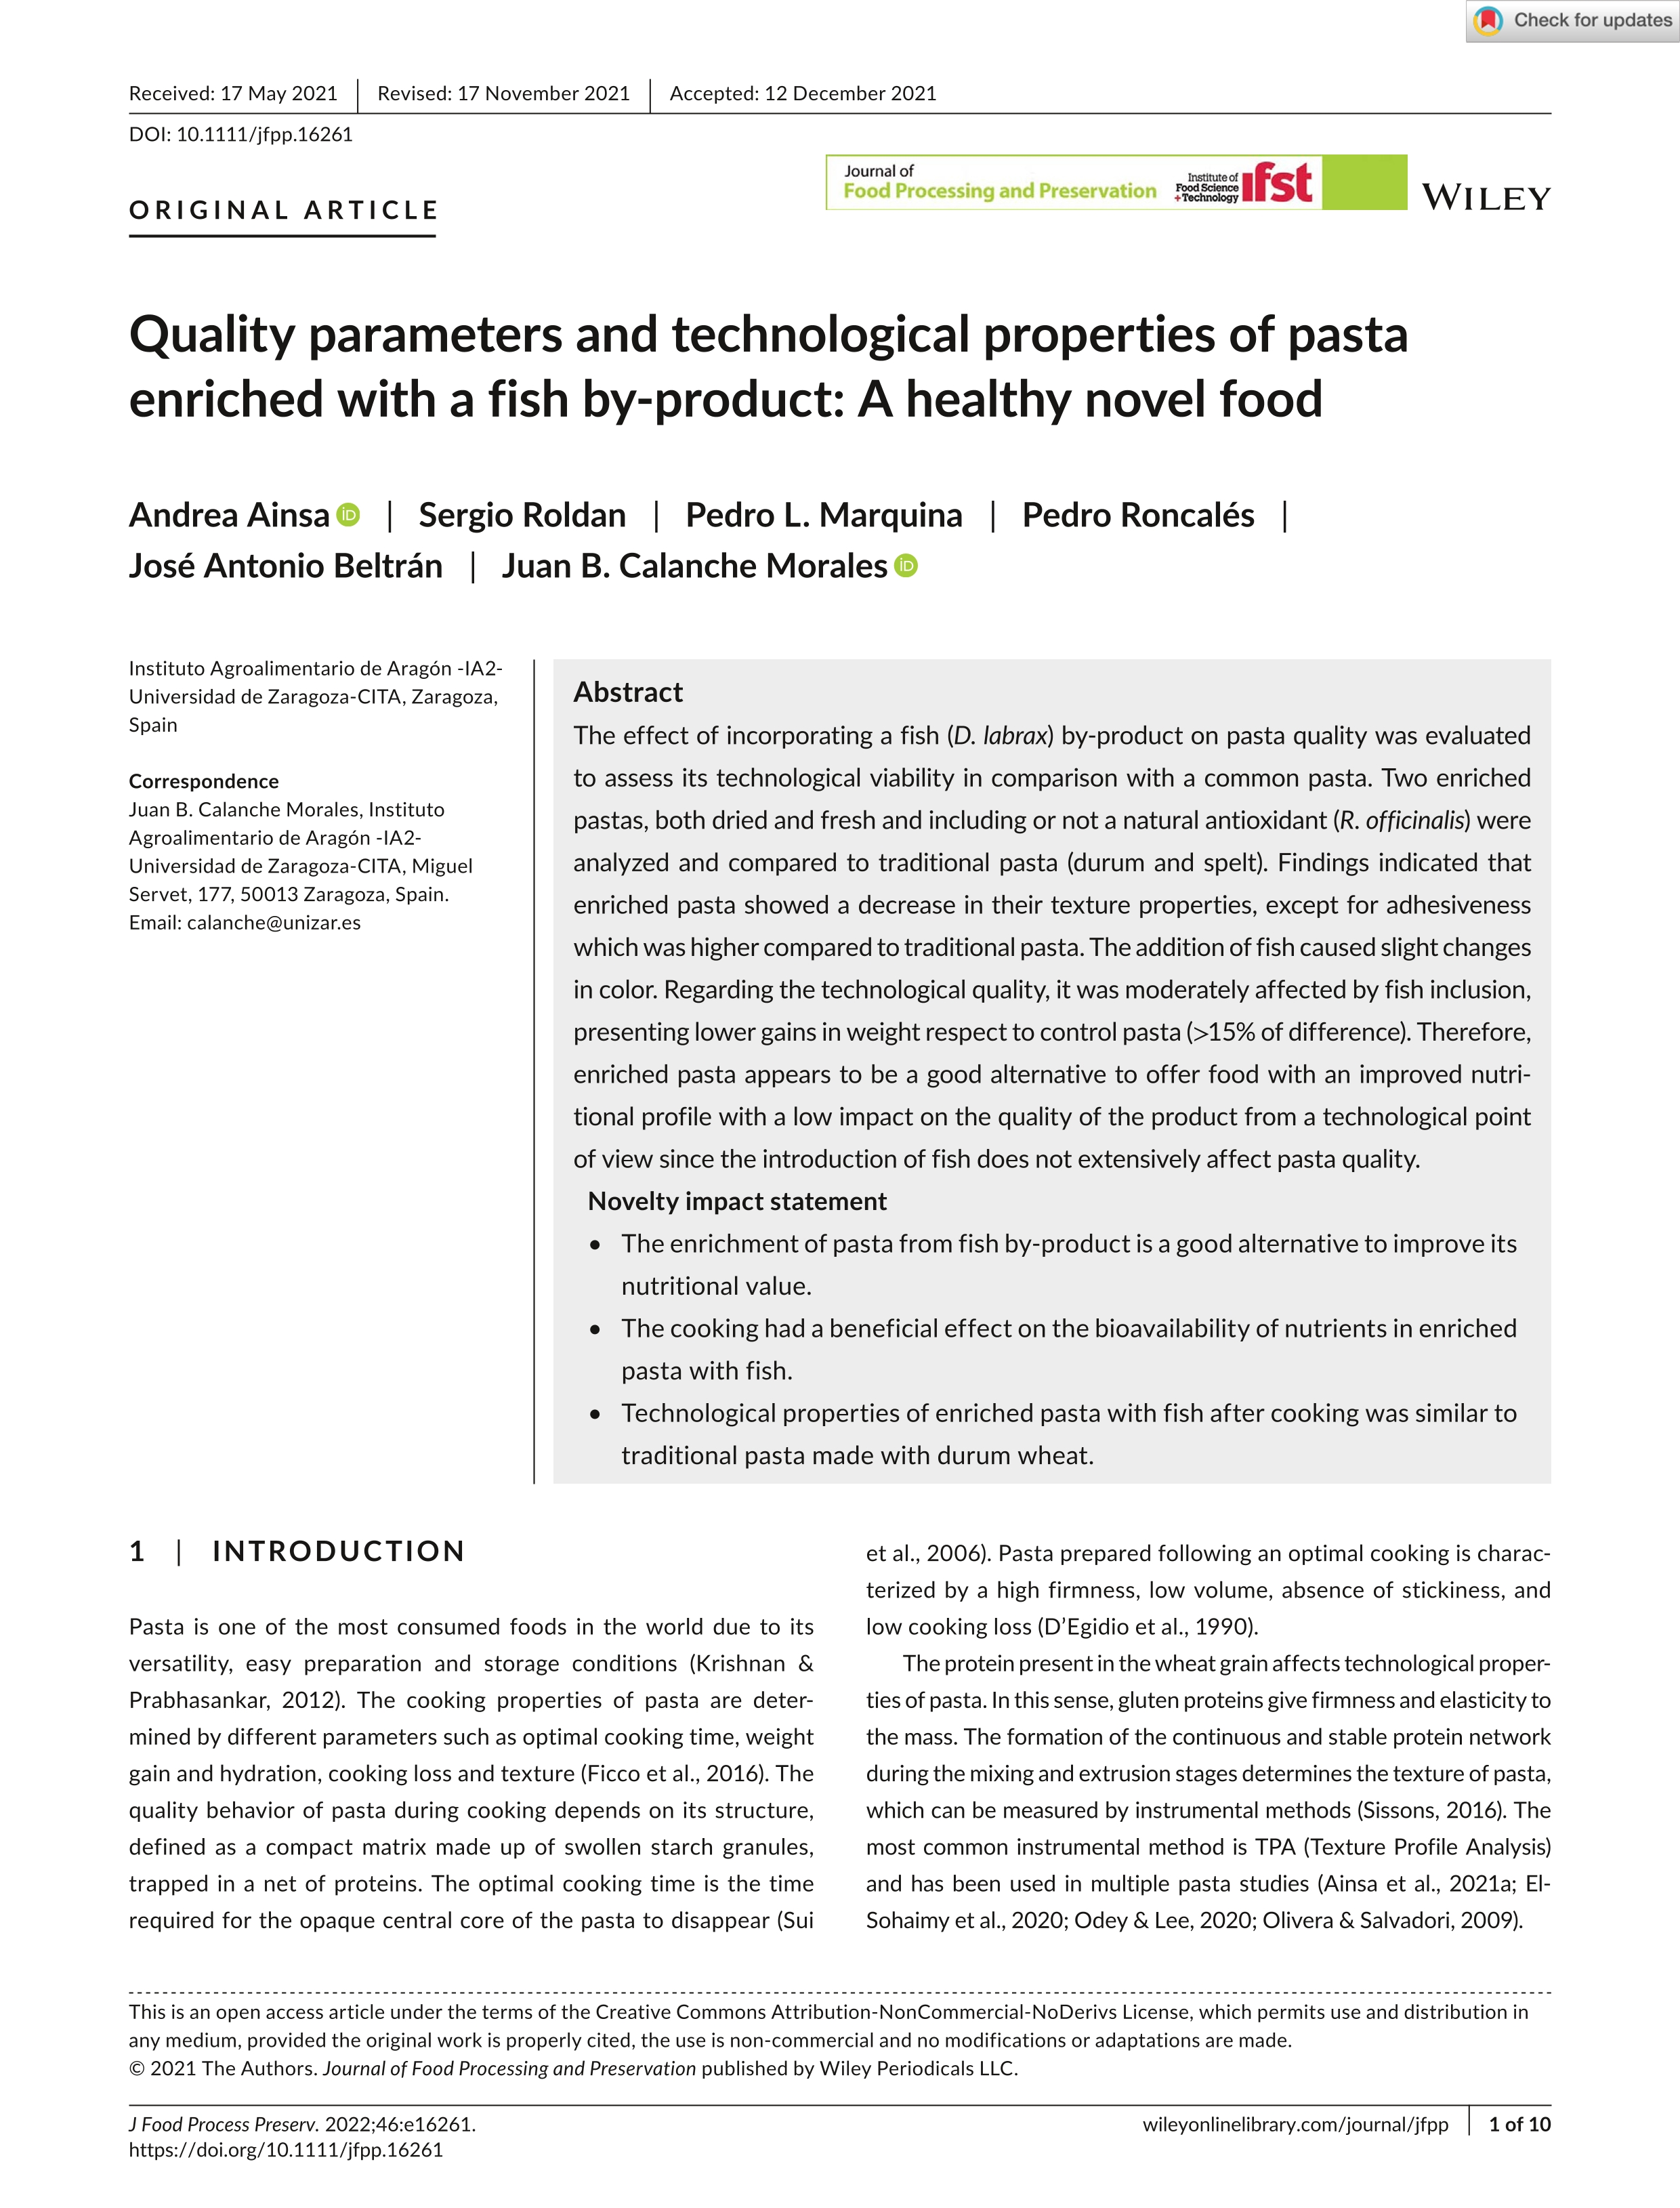 Quality parameters and technological properties of pasta enriched with a fish by-product: A healthy novel food